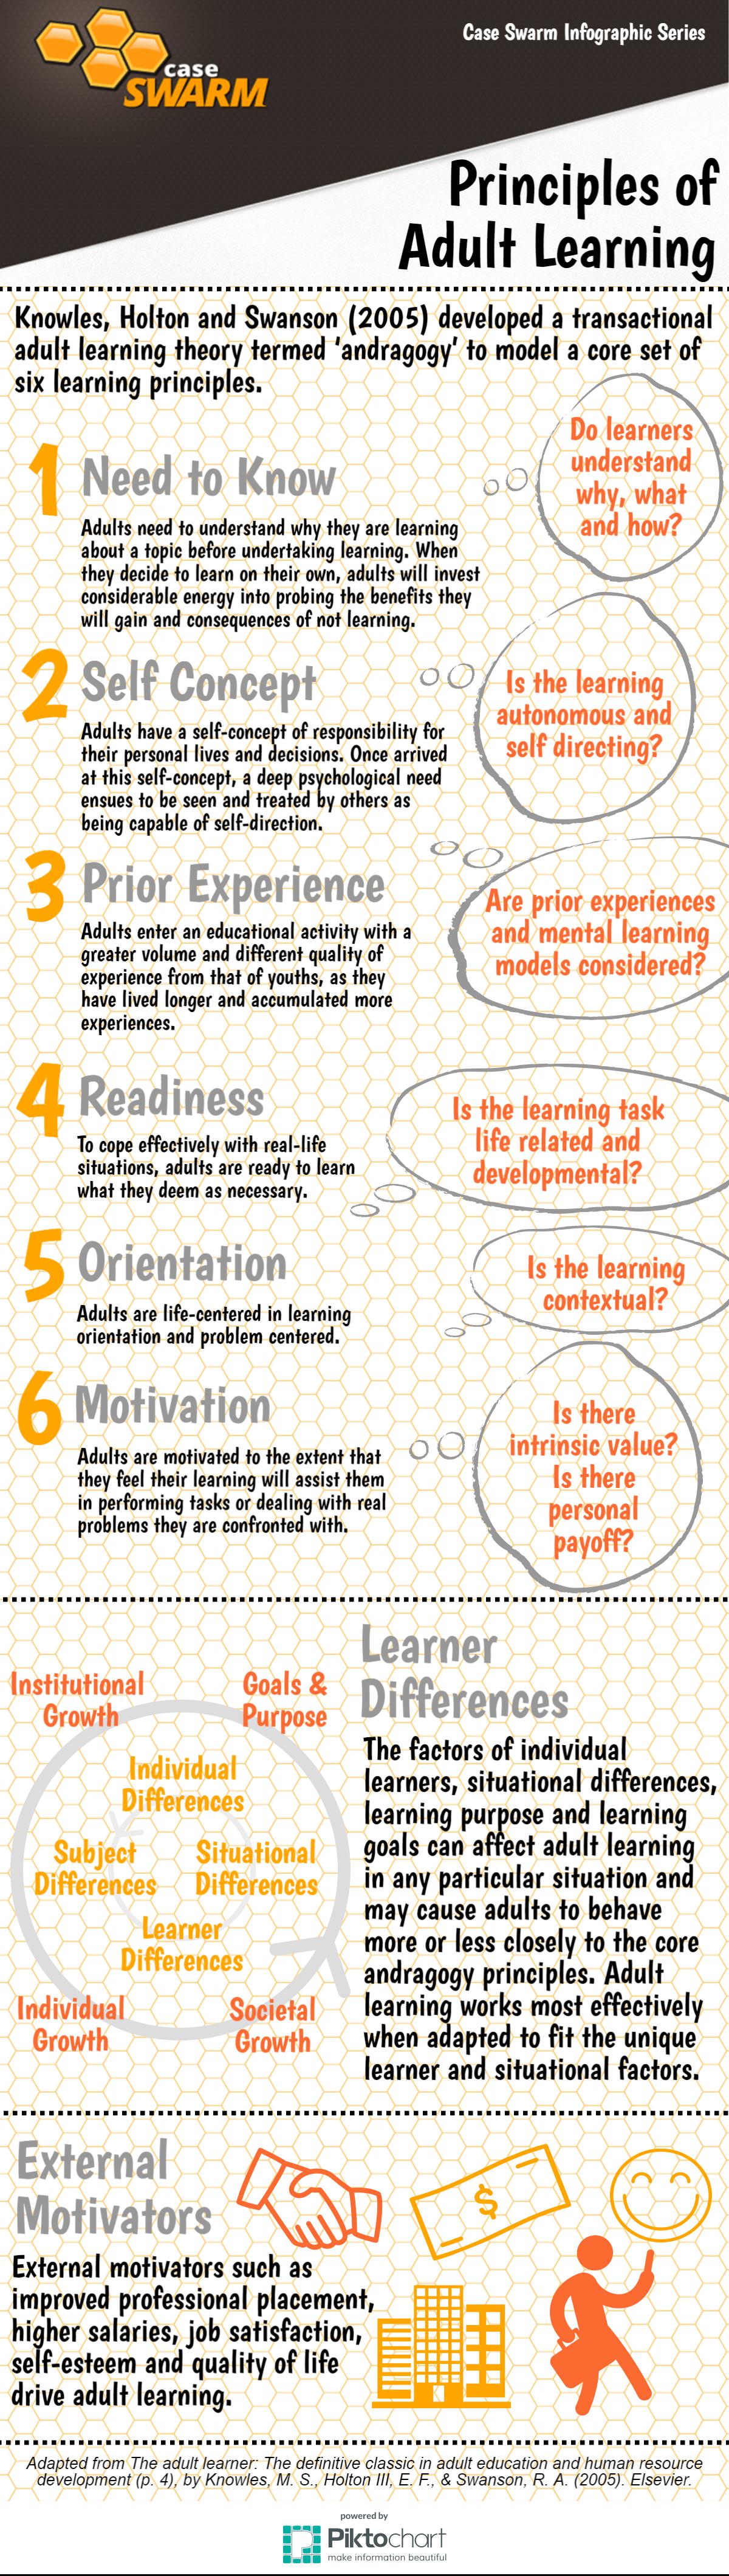 infographic - principles of adult learning